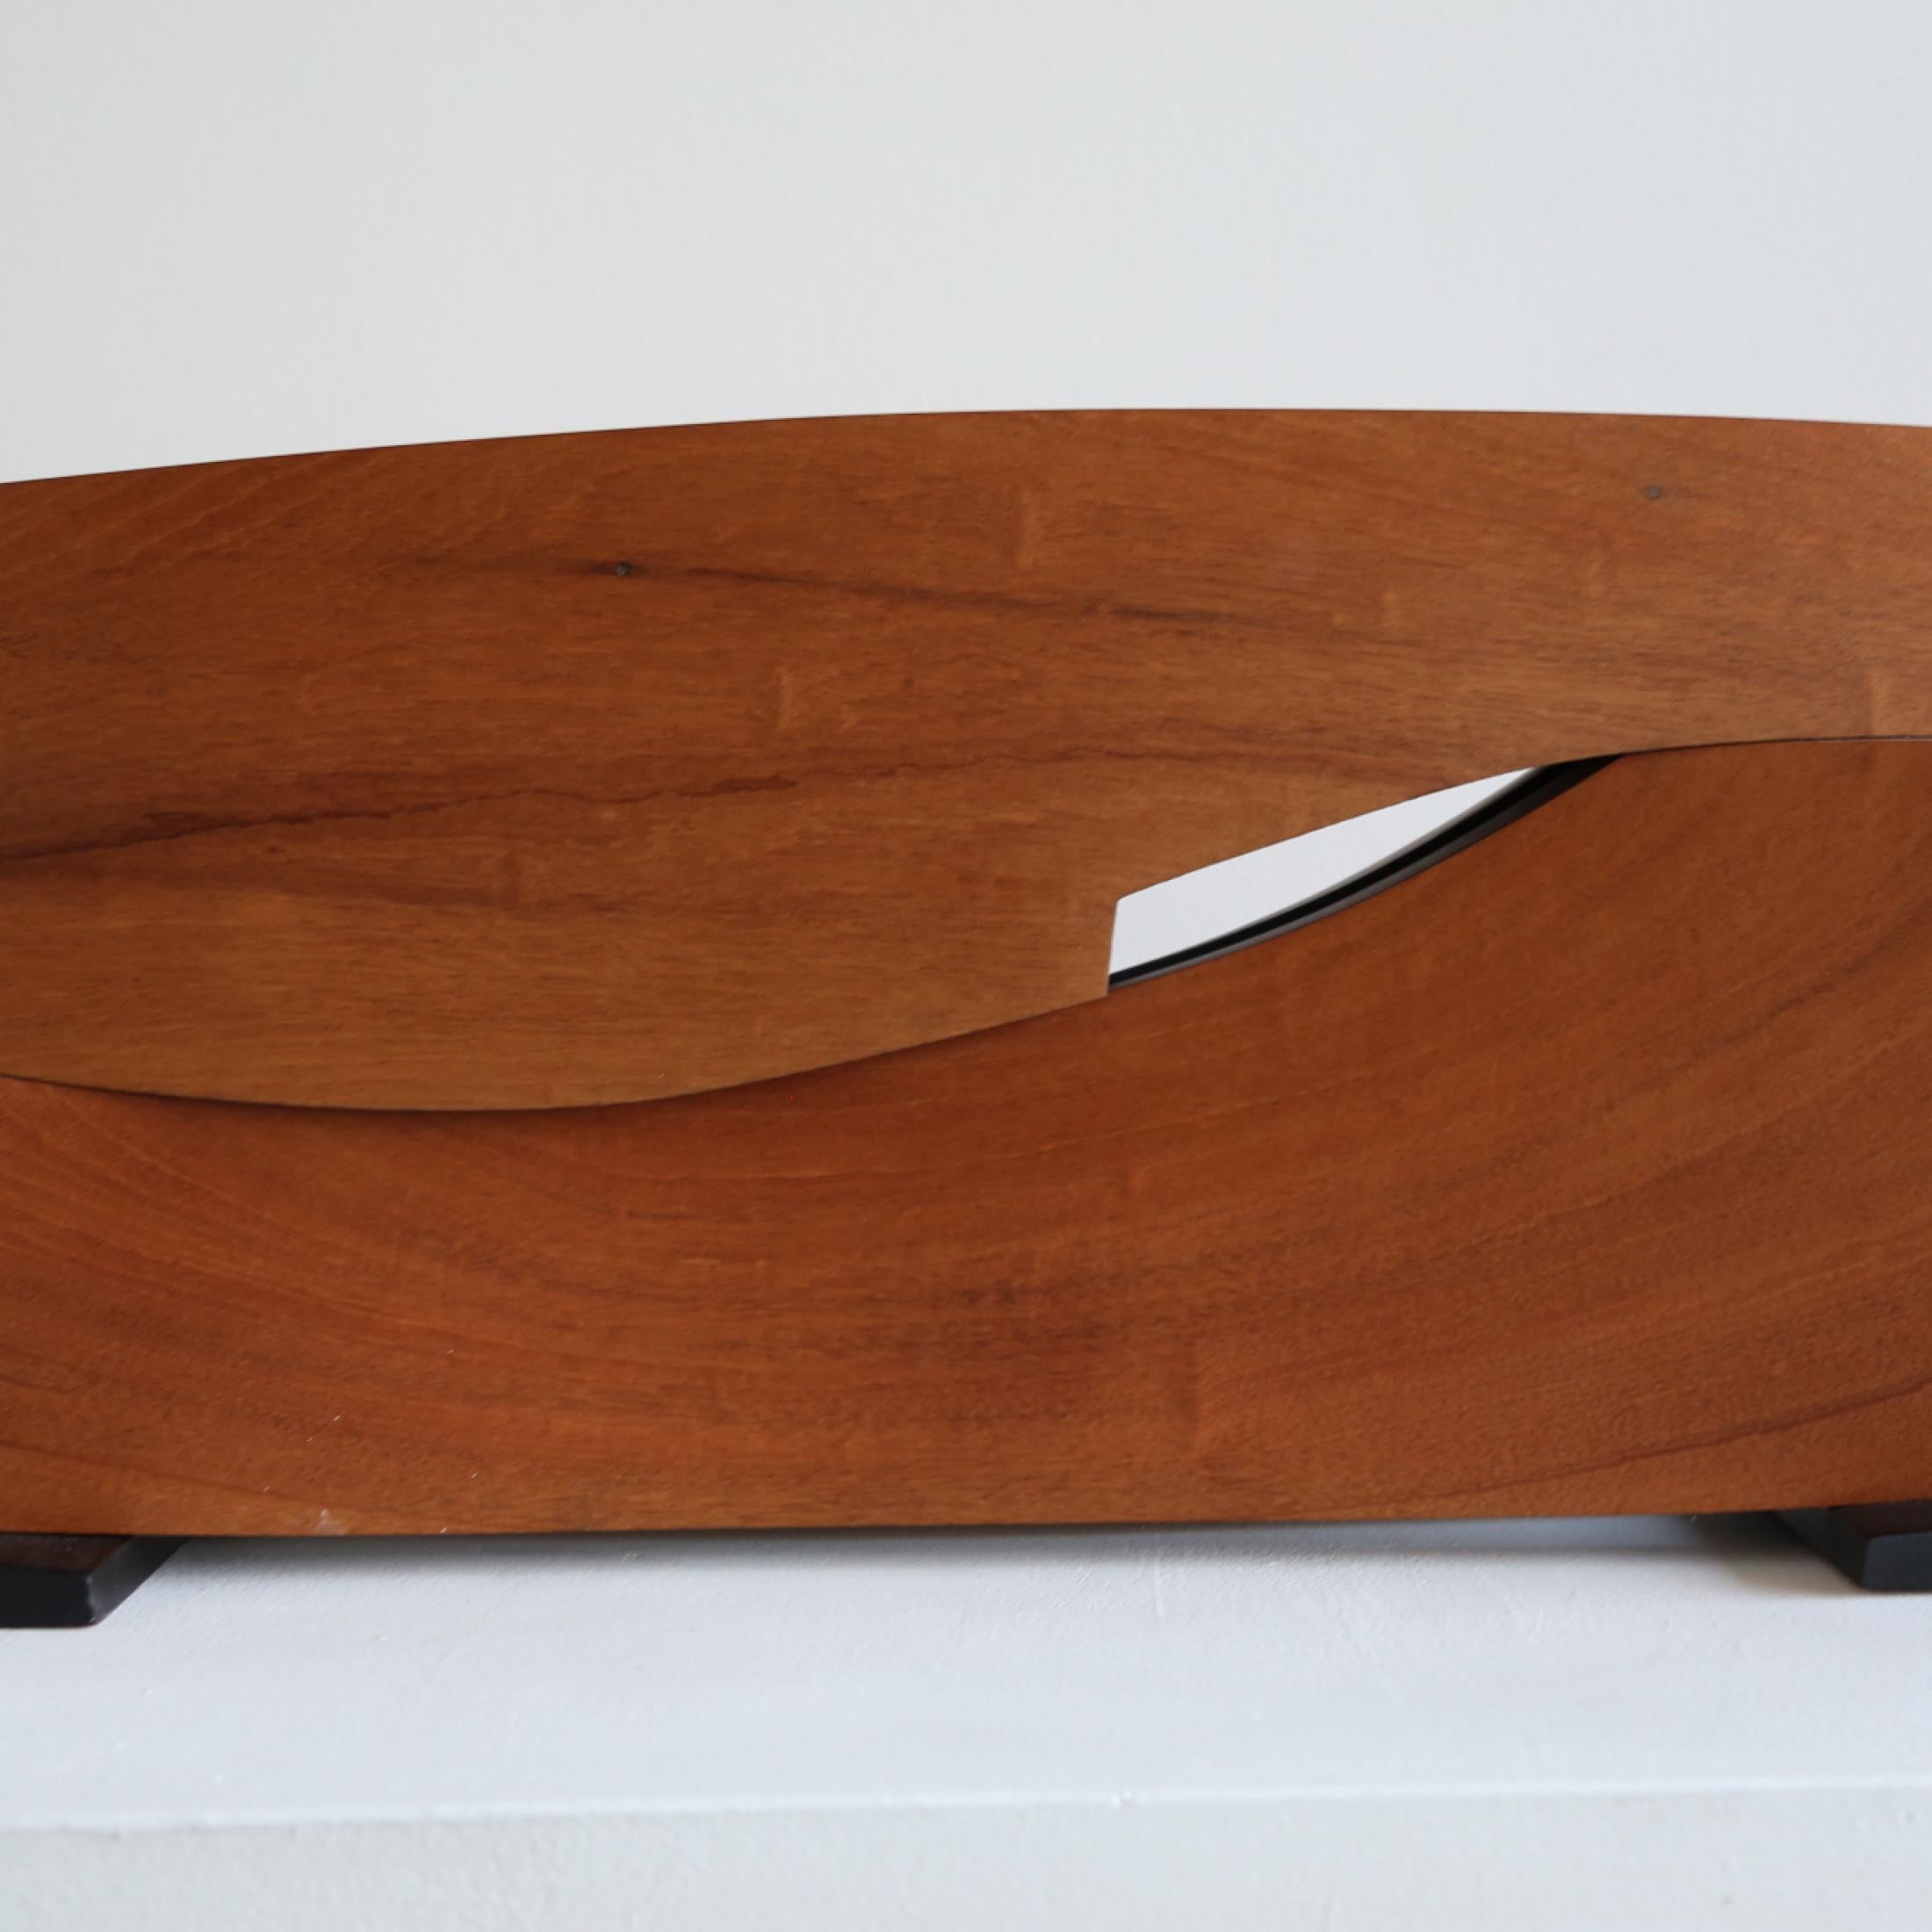 PARFAITE RENCONTRE 8 by Pascal Pierme is a mahogany that measures 30.00 X 14.00 in and is priced at $6,250.00.

French-born sculptor, Pascal Pierme is inspired by his surroundings. For the last 20 years, those surroundings have been Santa Fe, New